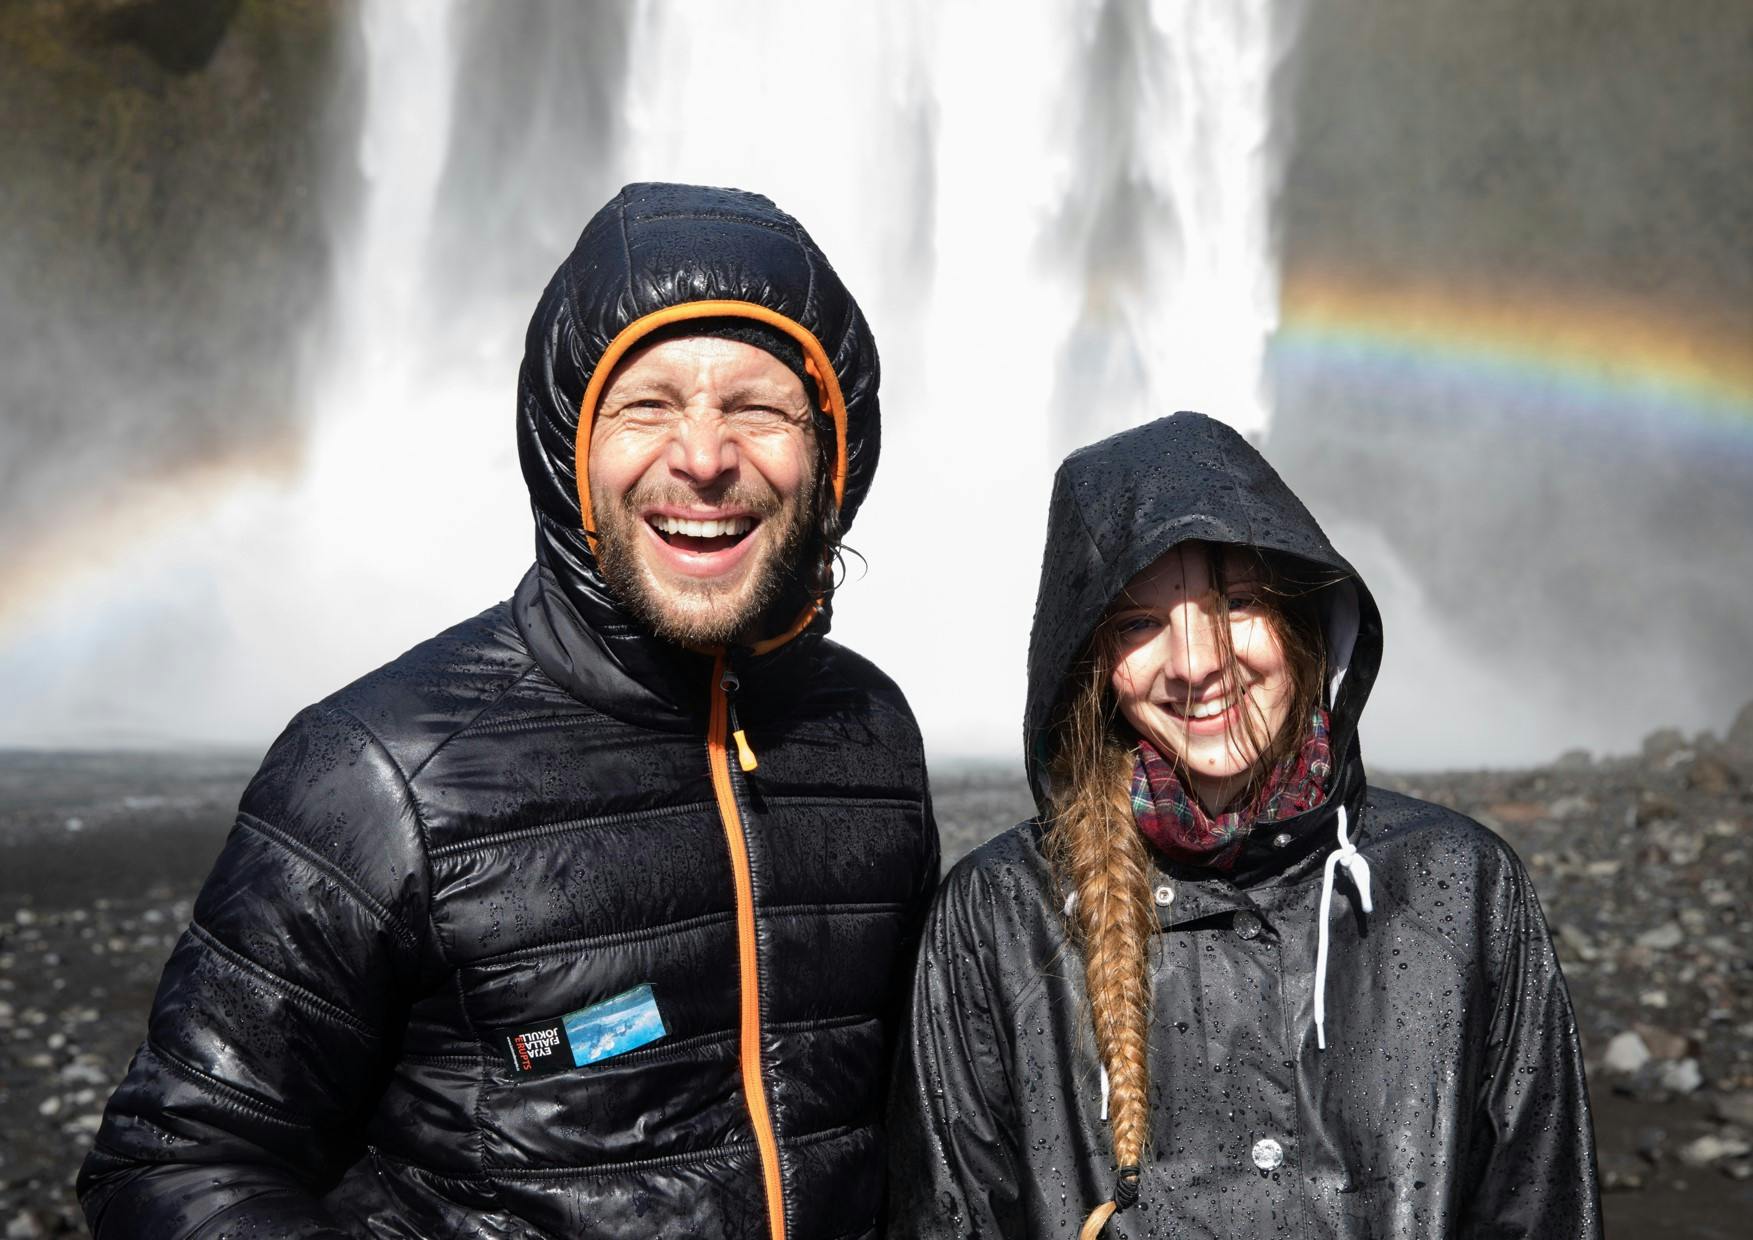 Icelandic waterfall with rainbow and people